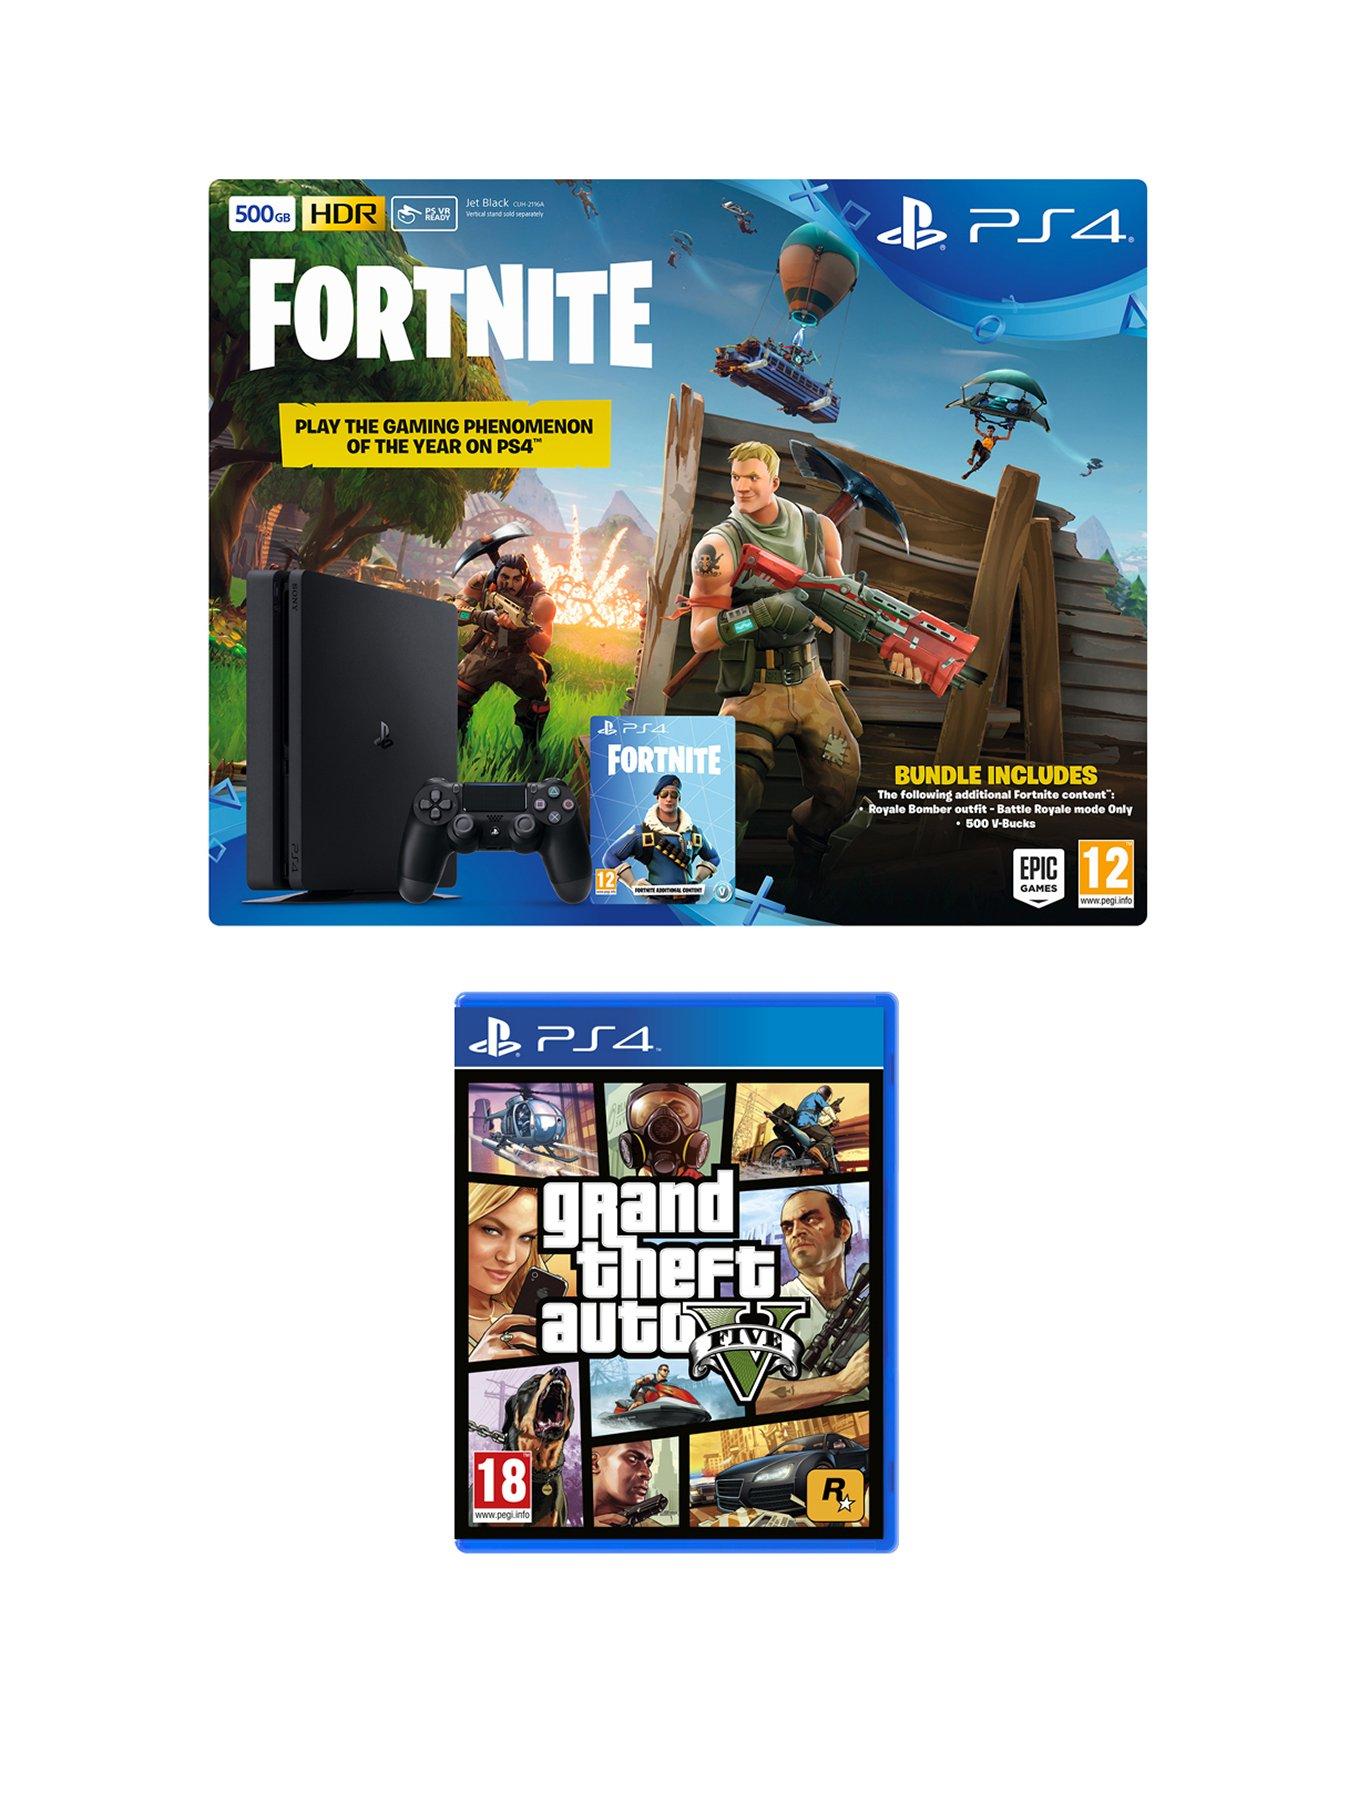 playstation 4 ps4 500gb black console with fortnite royal bomber skin and 500 v bucks with grand theft auto 5 gta v plus optional extra controller and or - fortnite gta 5